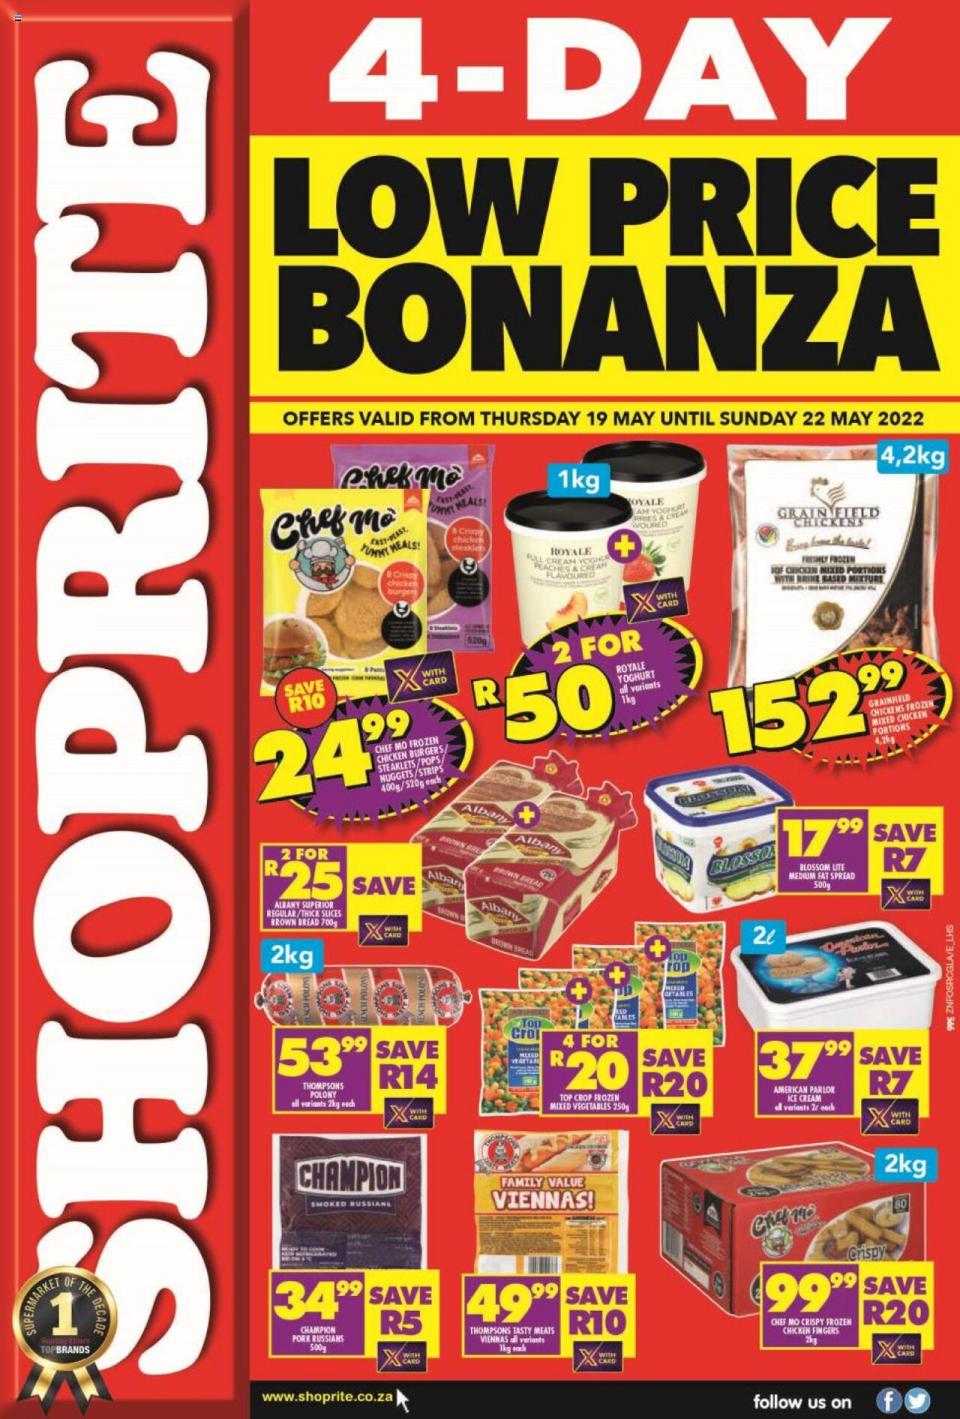 Shoprite Specials 19 May 2022 Shoprite Catalogue 4Day Low Price